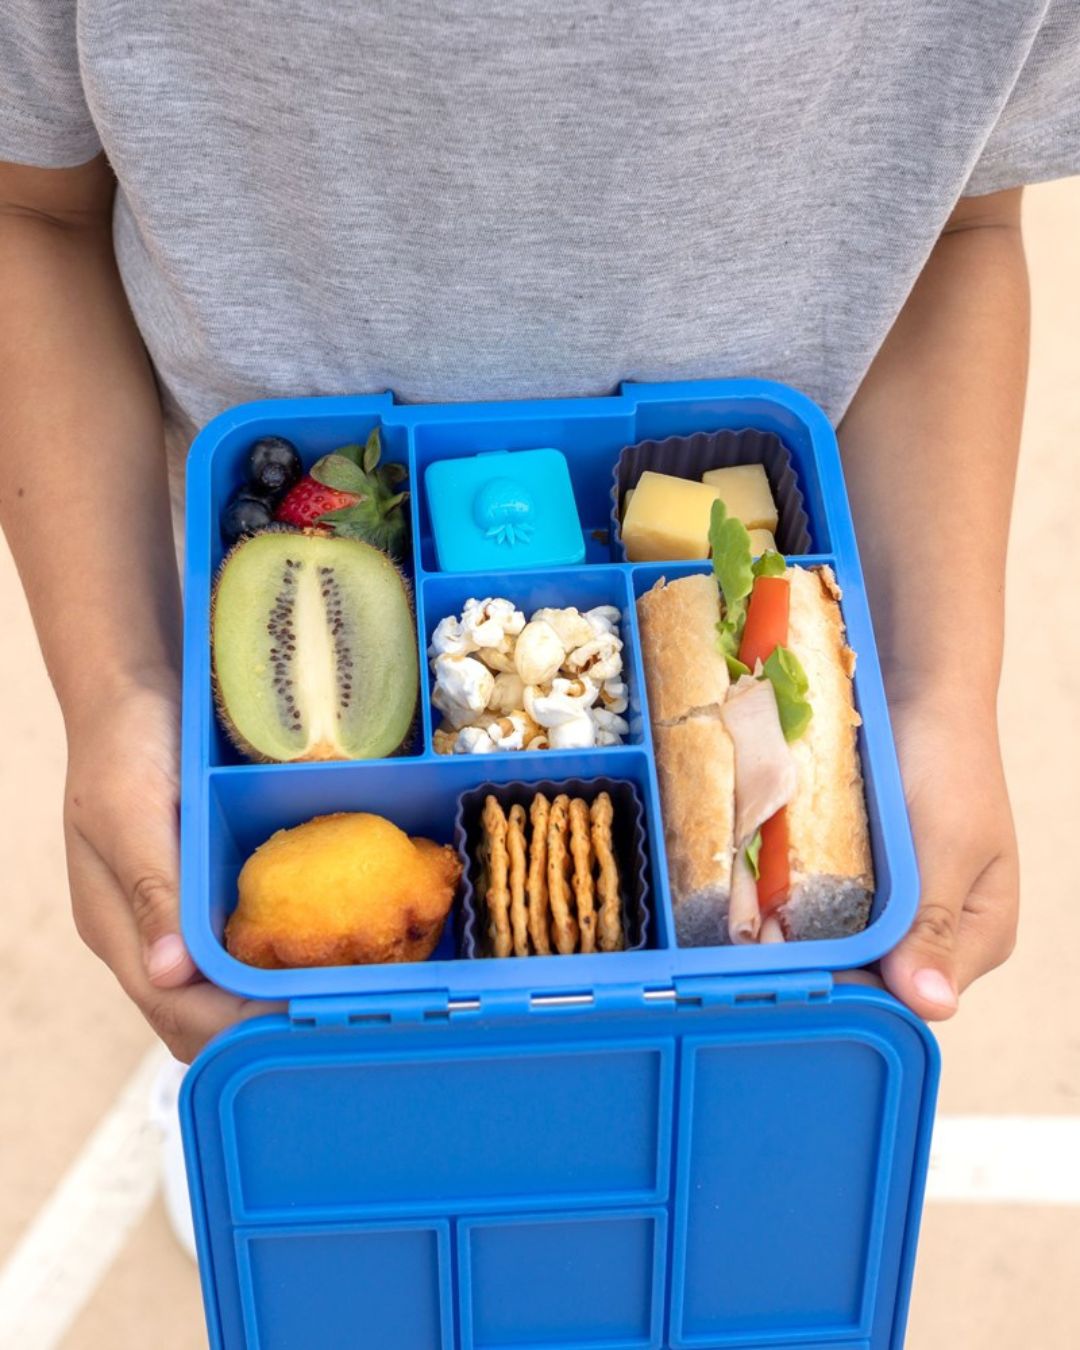 MontiiCo Bento Five Lunch Box - Blueberry